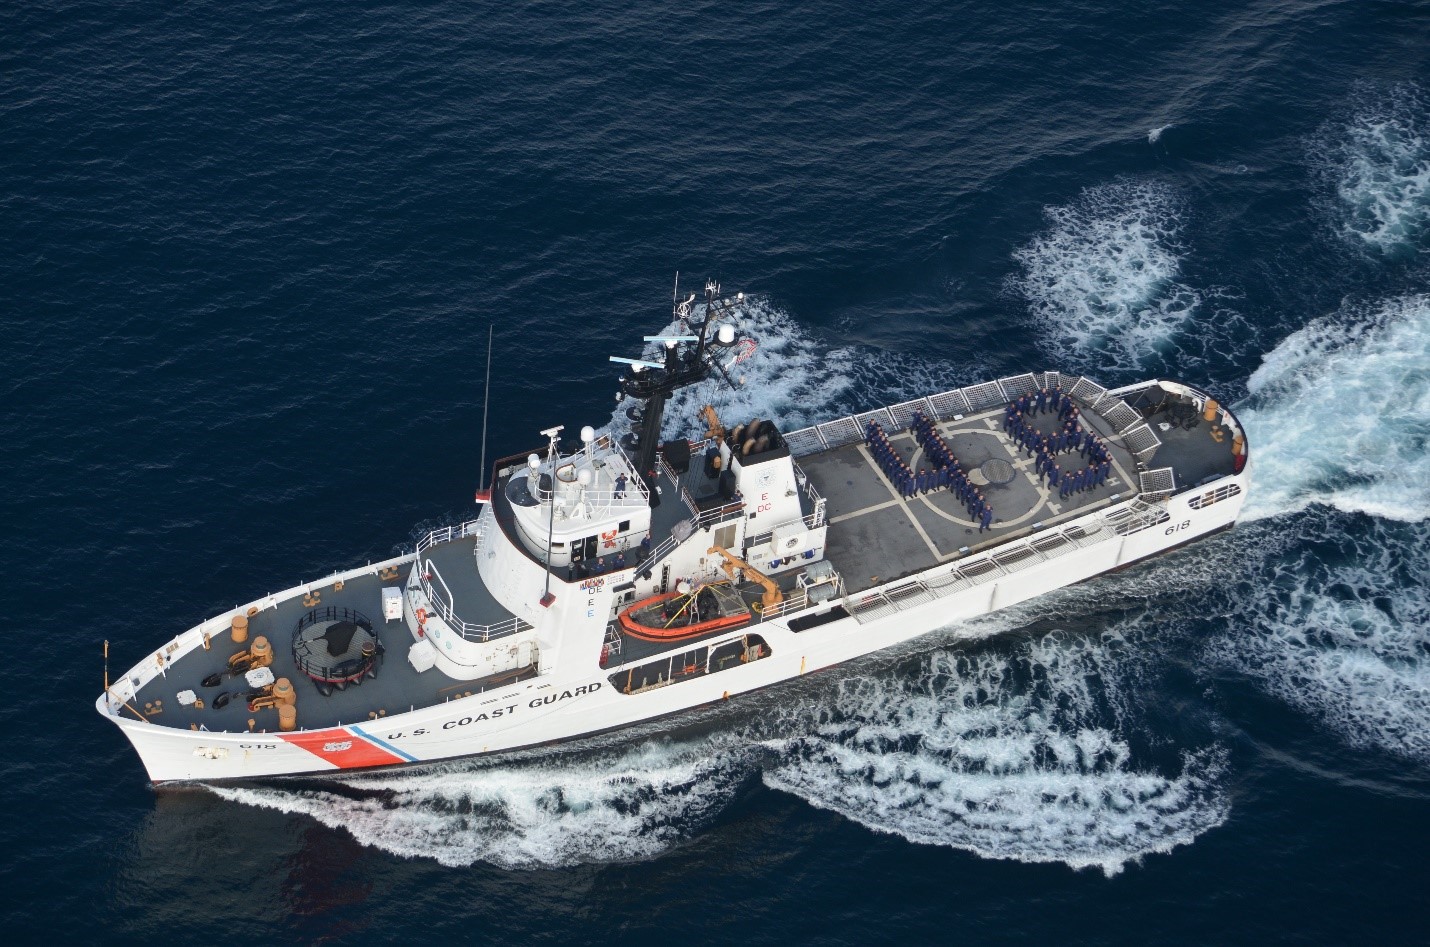 USCGC ACTIVE’s crew takes a photo commemorating the vessel’s 48th birthday in 2014